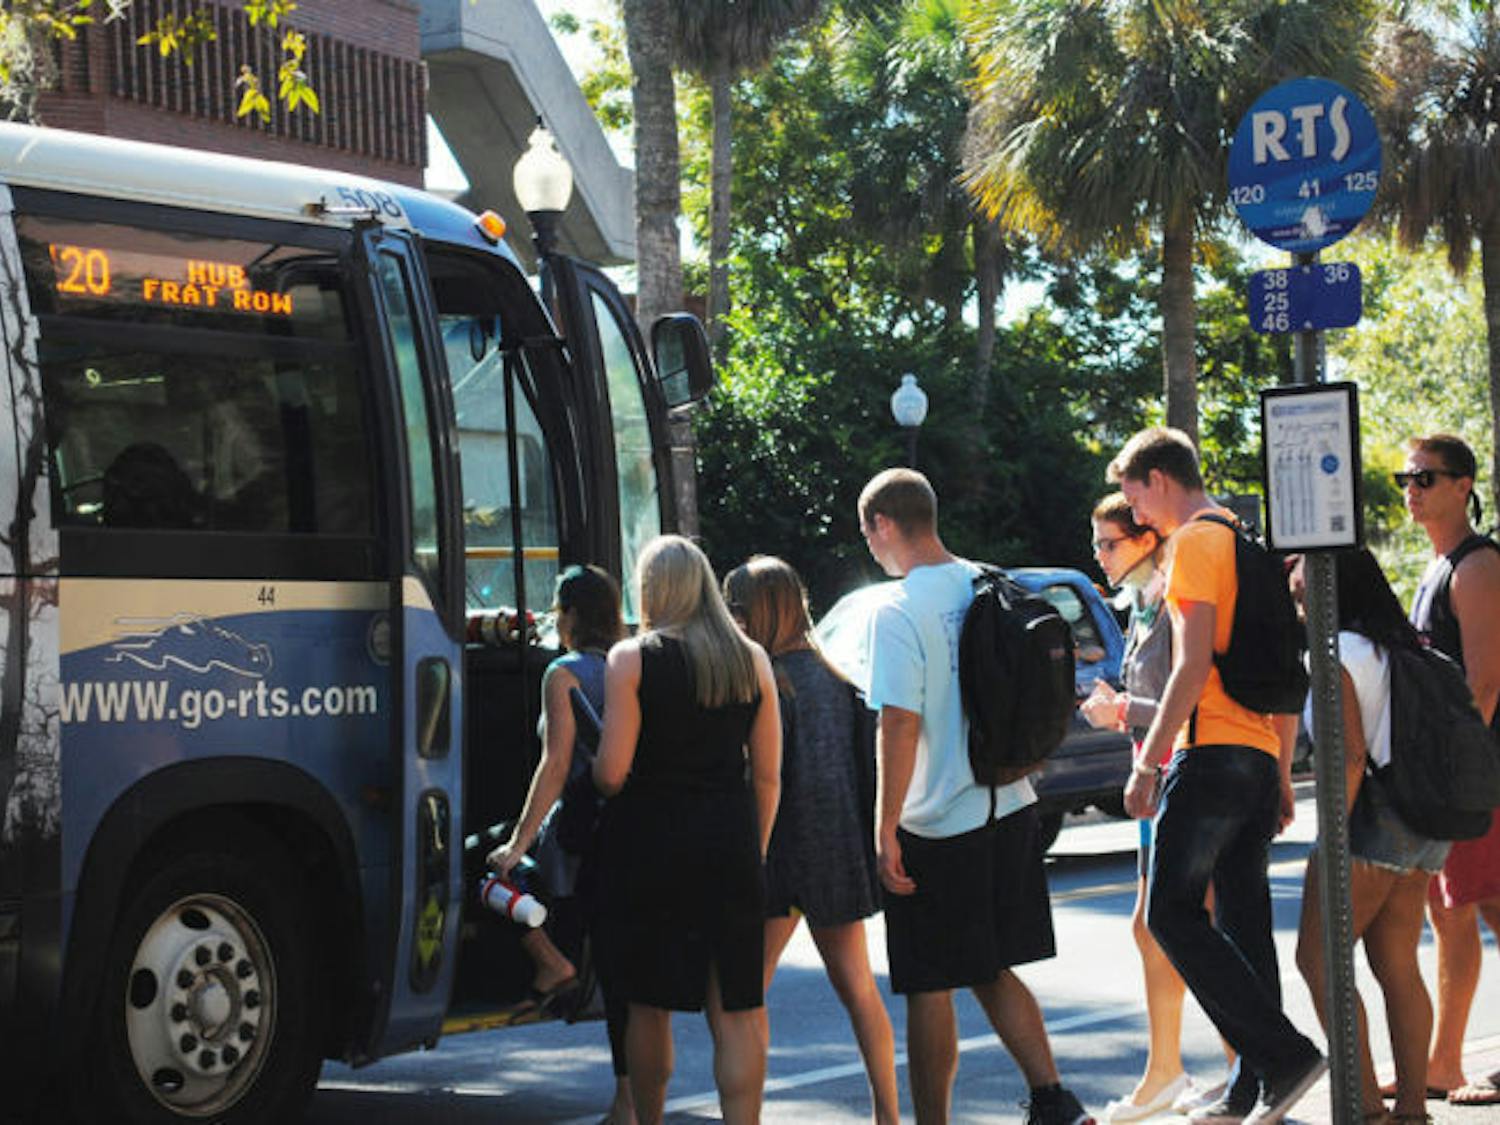 Students wait in line to board a bus Wednesday afternoon. Gainesville RTS set new ridership records for this fiscal year, which ran through Sept. 30.